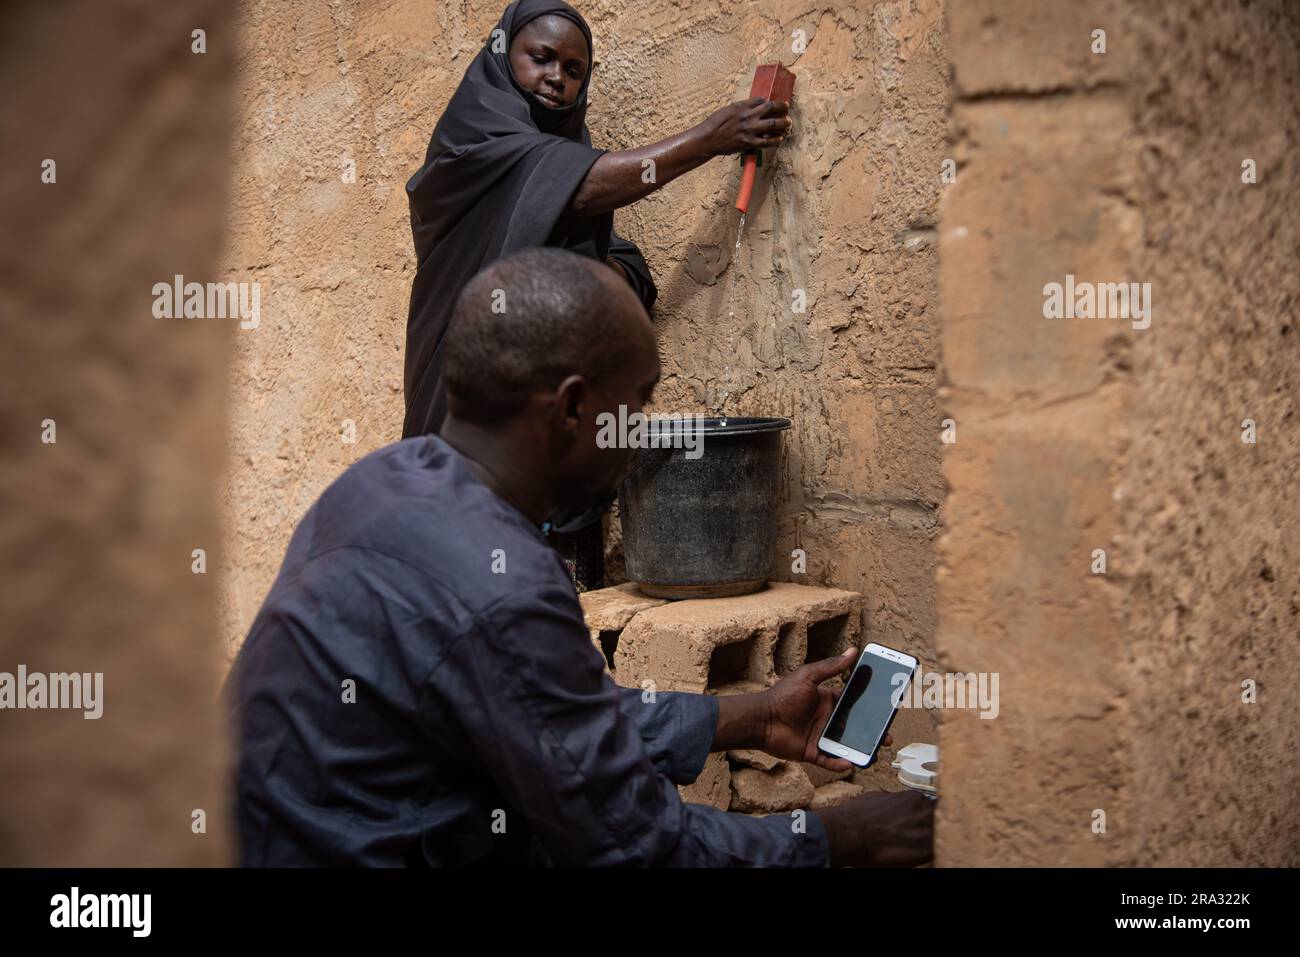 Nicolas Remene / Le Pictorium -  Prepaid meters and mobile application in Niger -  29/5/2020  -  Niger / Niamey / Niamey  -  In the Goudel Maourey district of Niamey in Niger, 'smart' water meters have been installed, enabling each family to pay for its water consumption as it occurs, using a mobile phone and an application. This type of prepaid meter allows local residents to regulate their consumption according to their income. This makes it possible to offer access to drinking water at home at a lower cost, with a prepayment system adapted to the irregular incomes of a large proportion of d Stock Photo